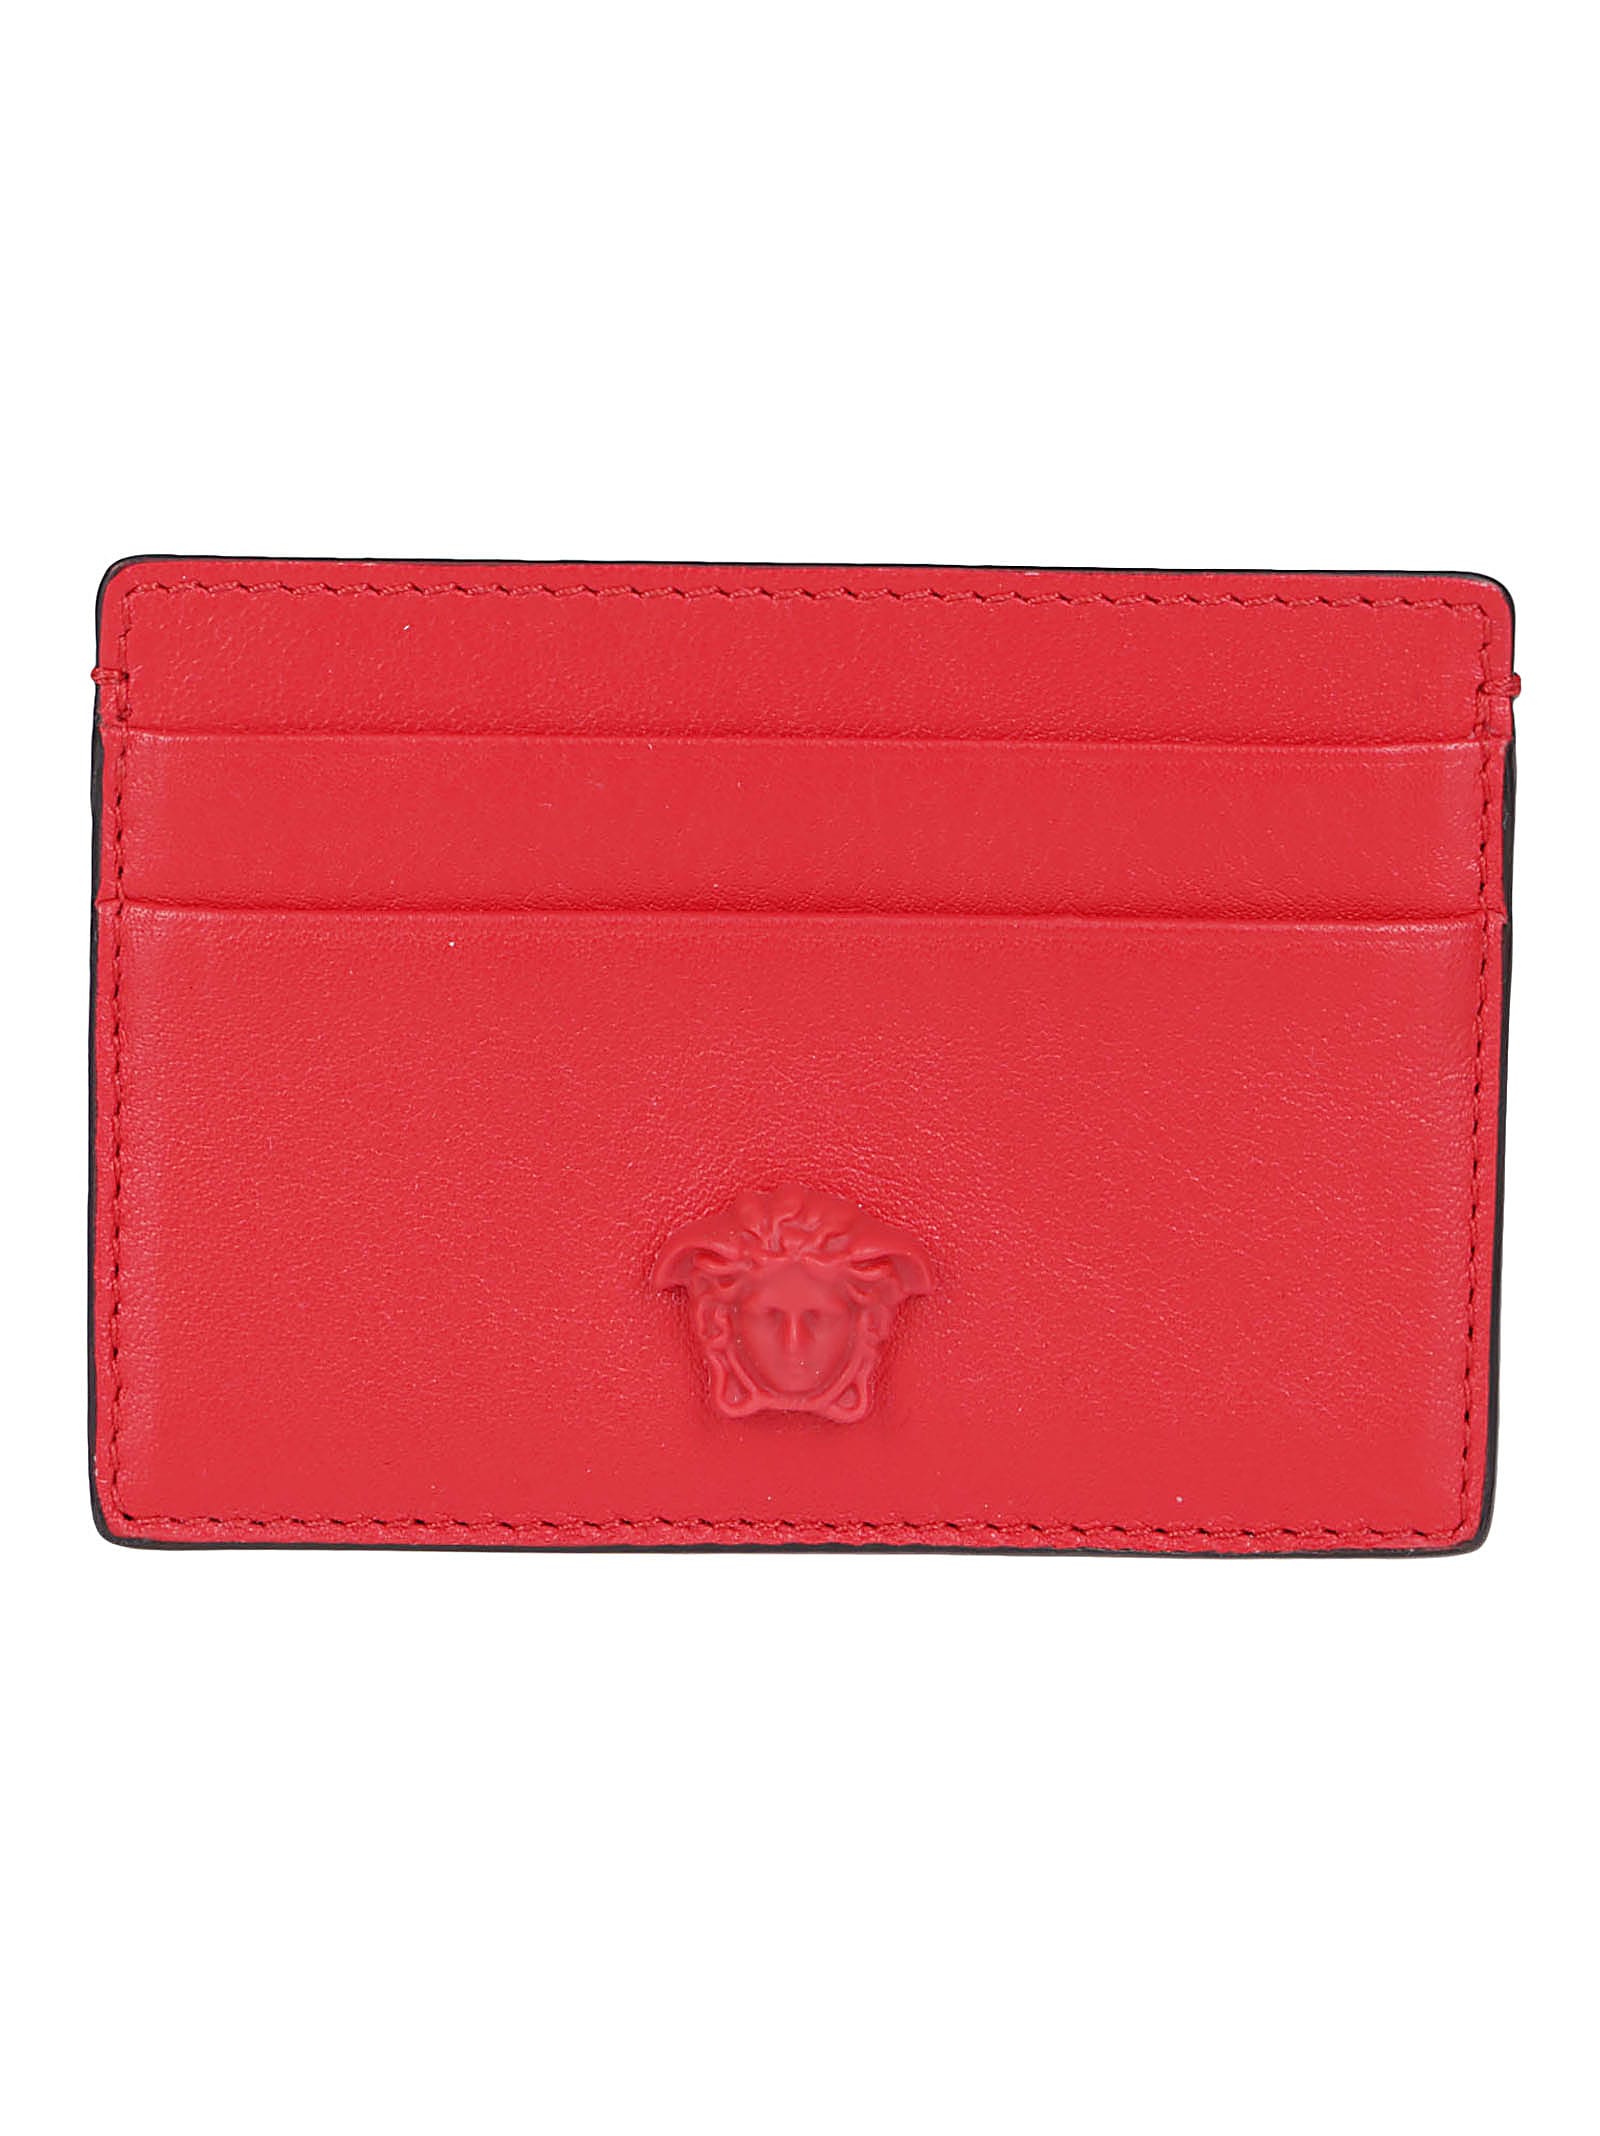 Versace Red Leather Cardholder